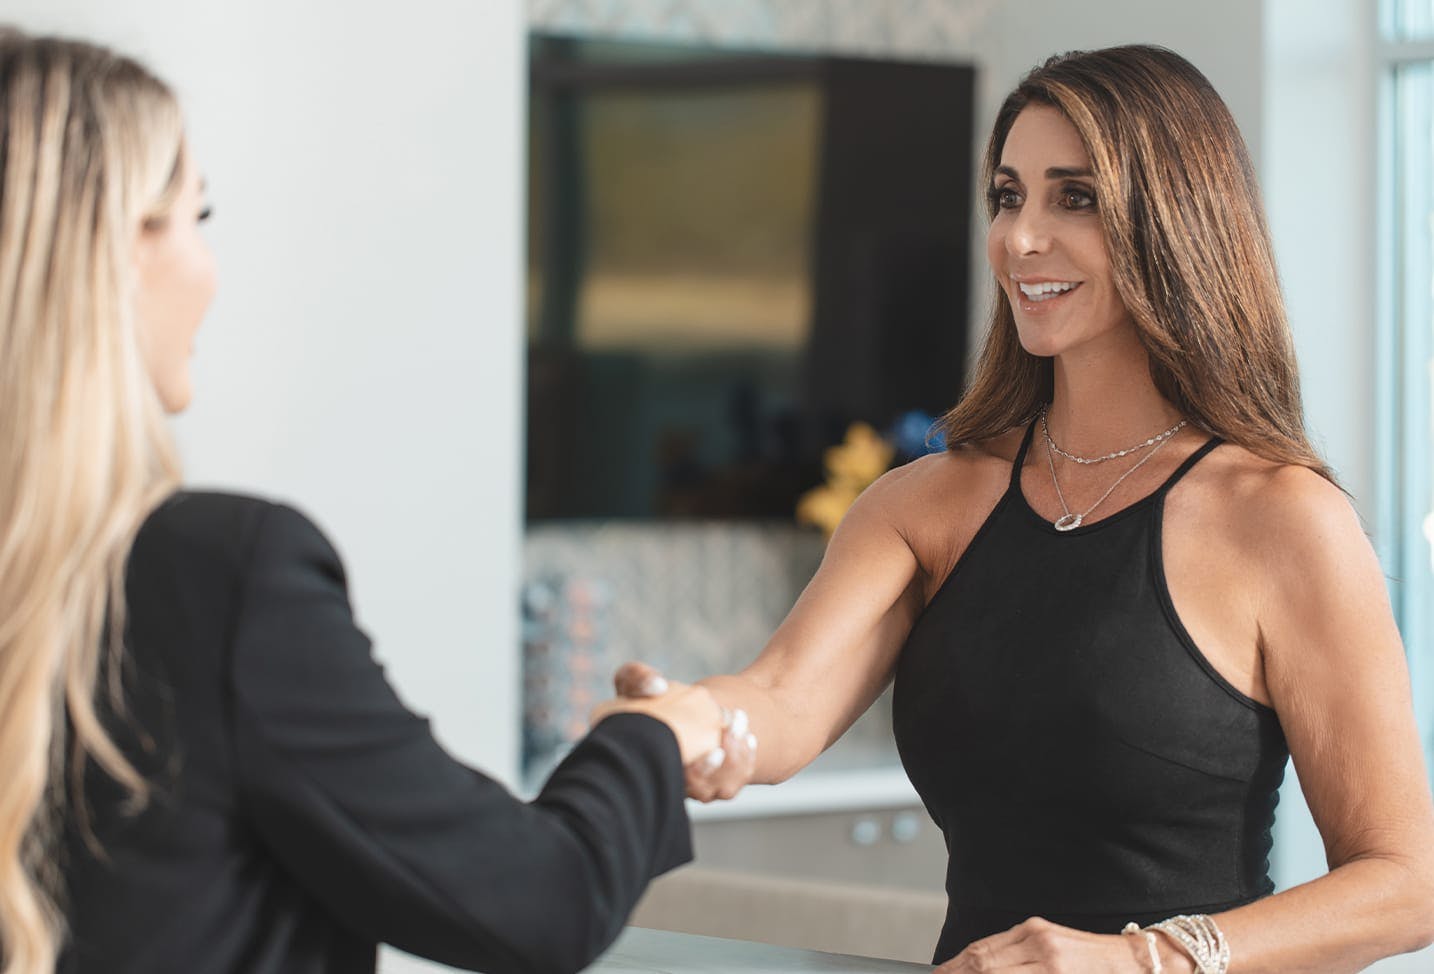 brunette patient giving a woman at the front desk a handshake